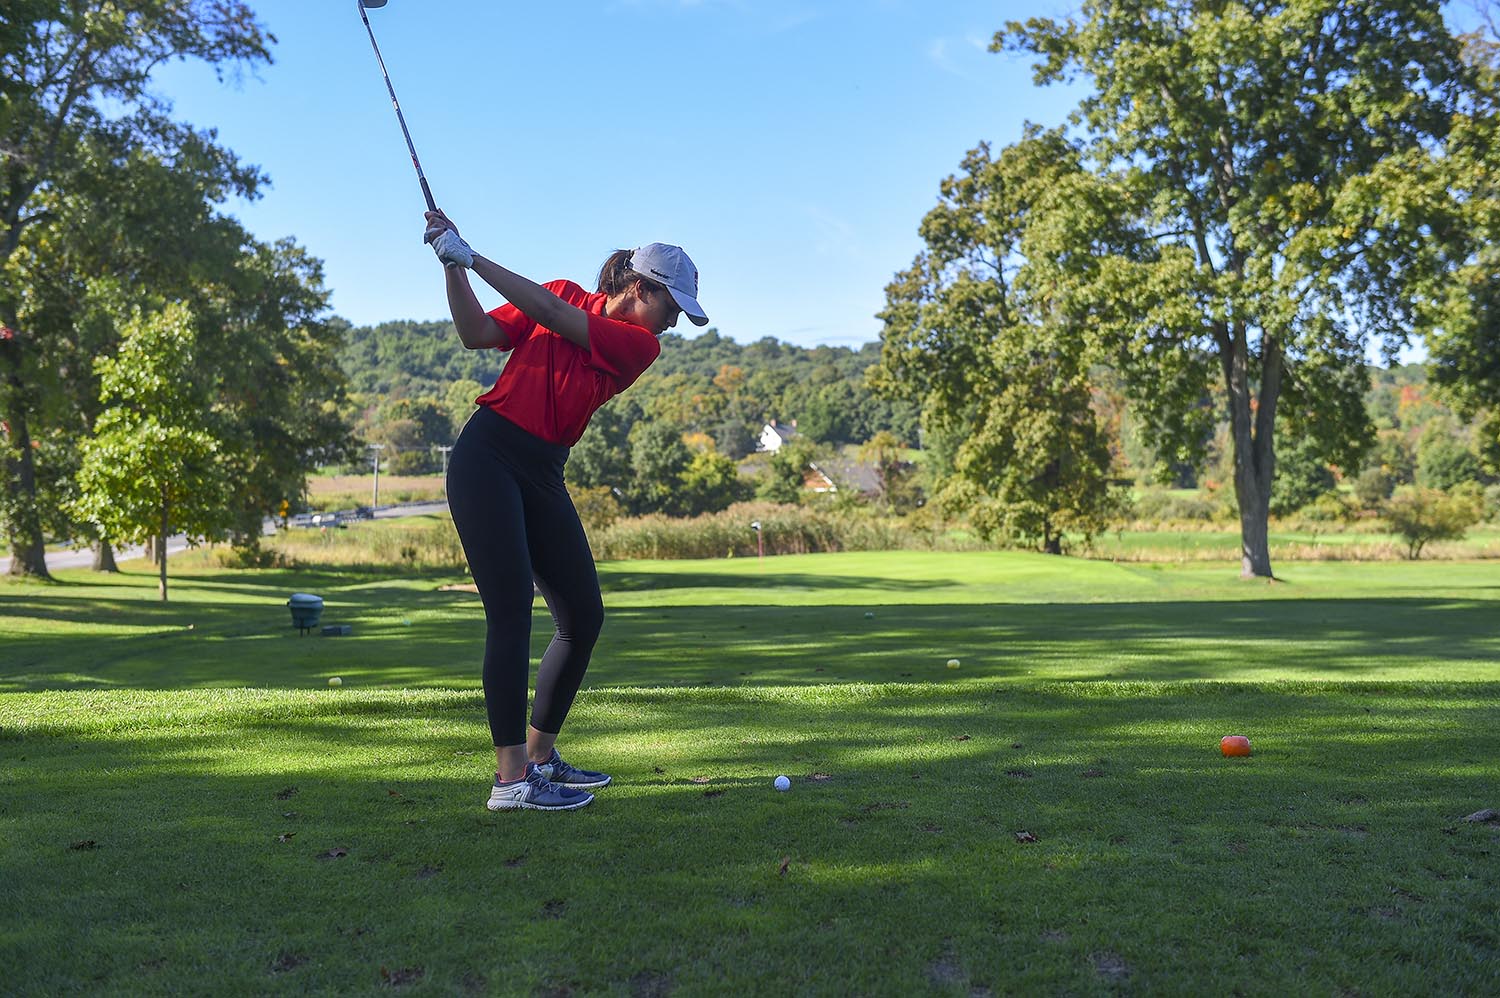 The three individuals that competed in fall competition this season were juniors Saadia Naeem and Emma Mehta, and first-year Meg Wiley. Naeem is the most experienced of the trio, having been a member of the Wesleyan golf team since 2016–17. She will serve as the team's captain in its inaugural 2019–20 season.